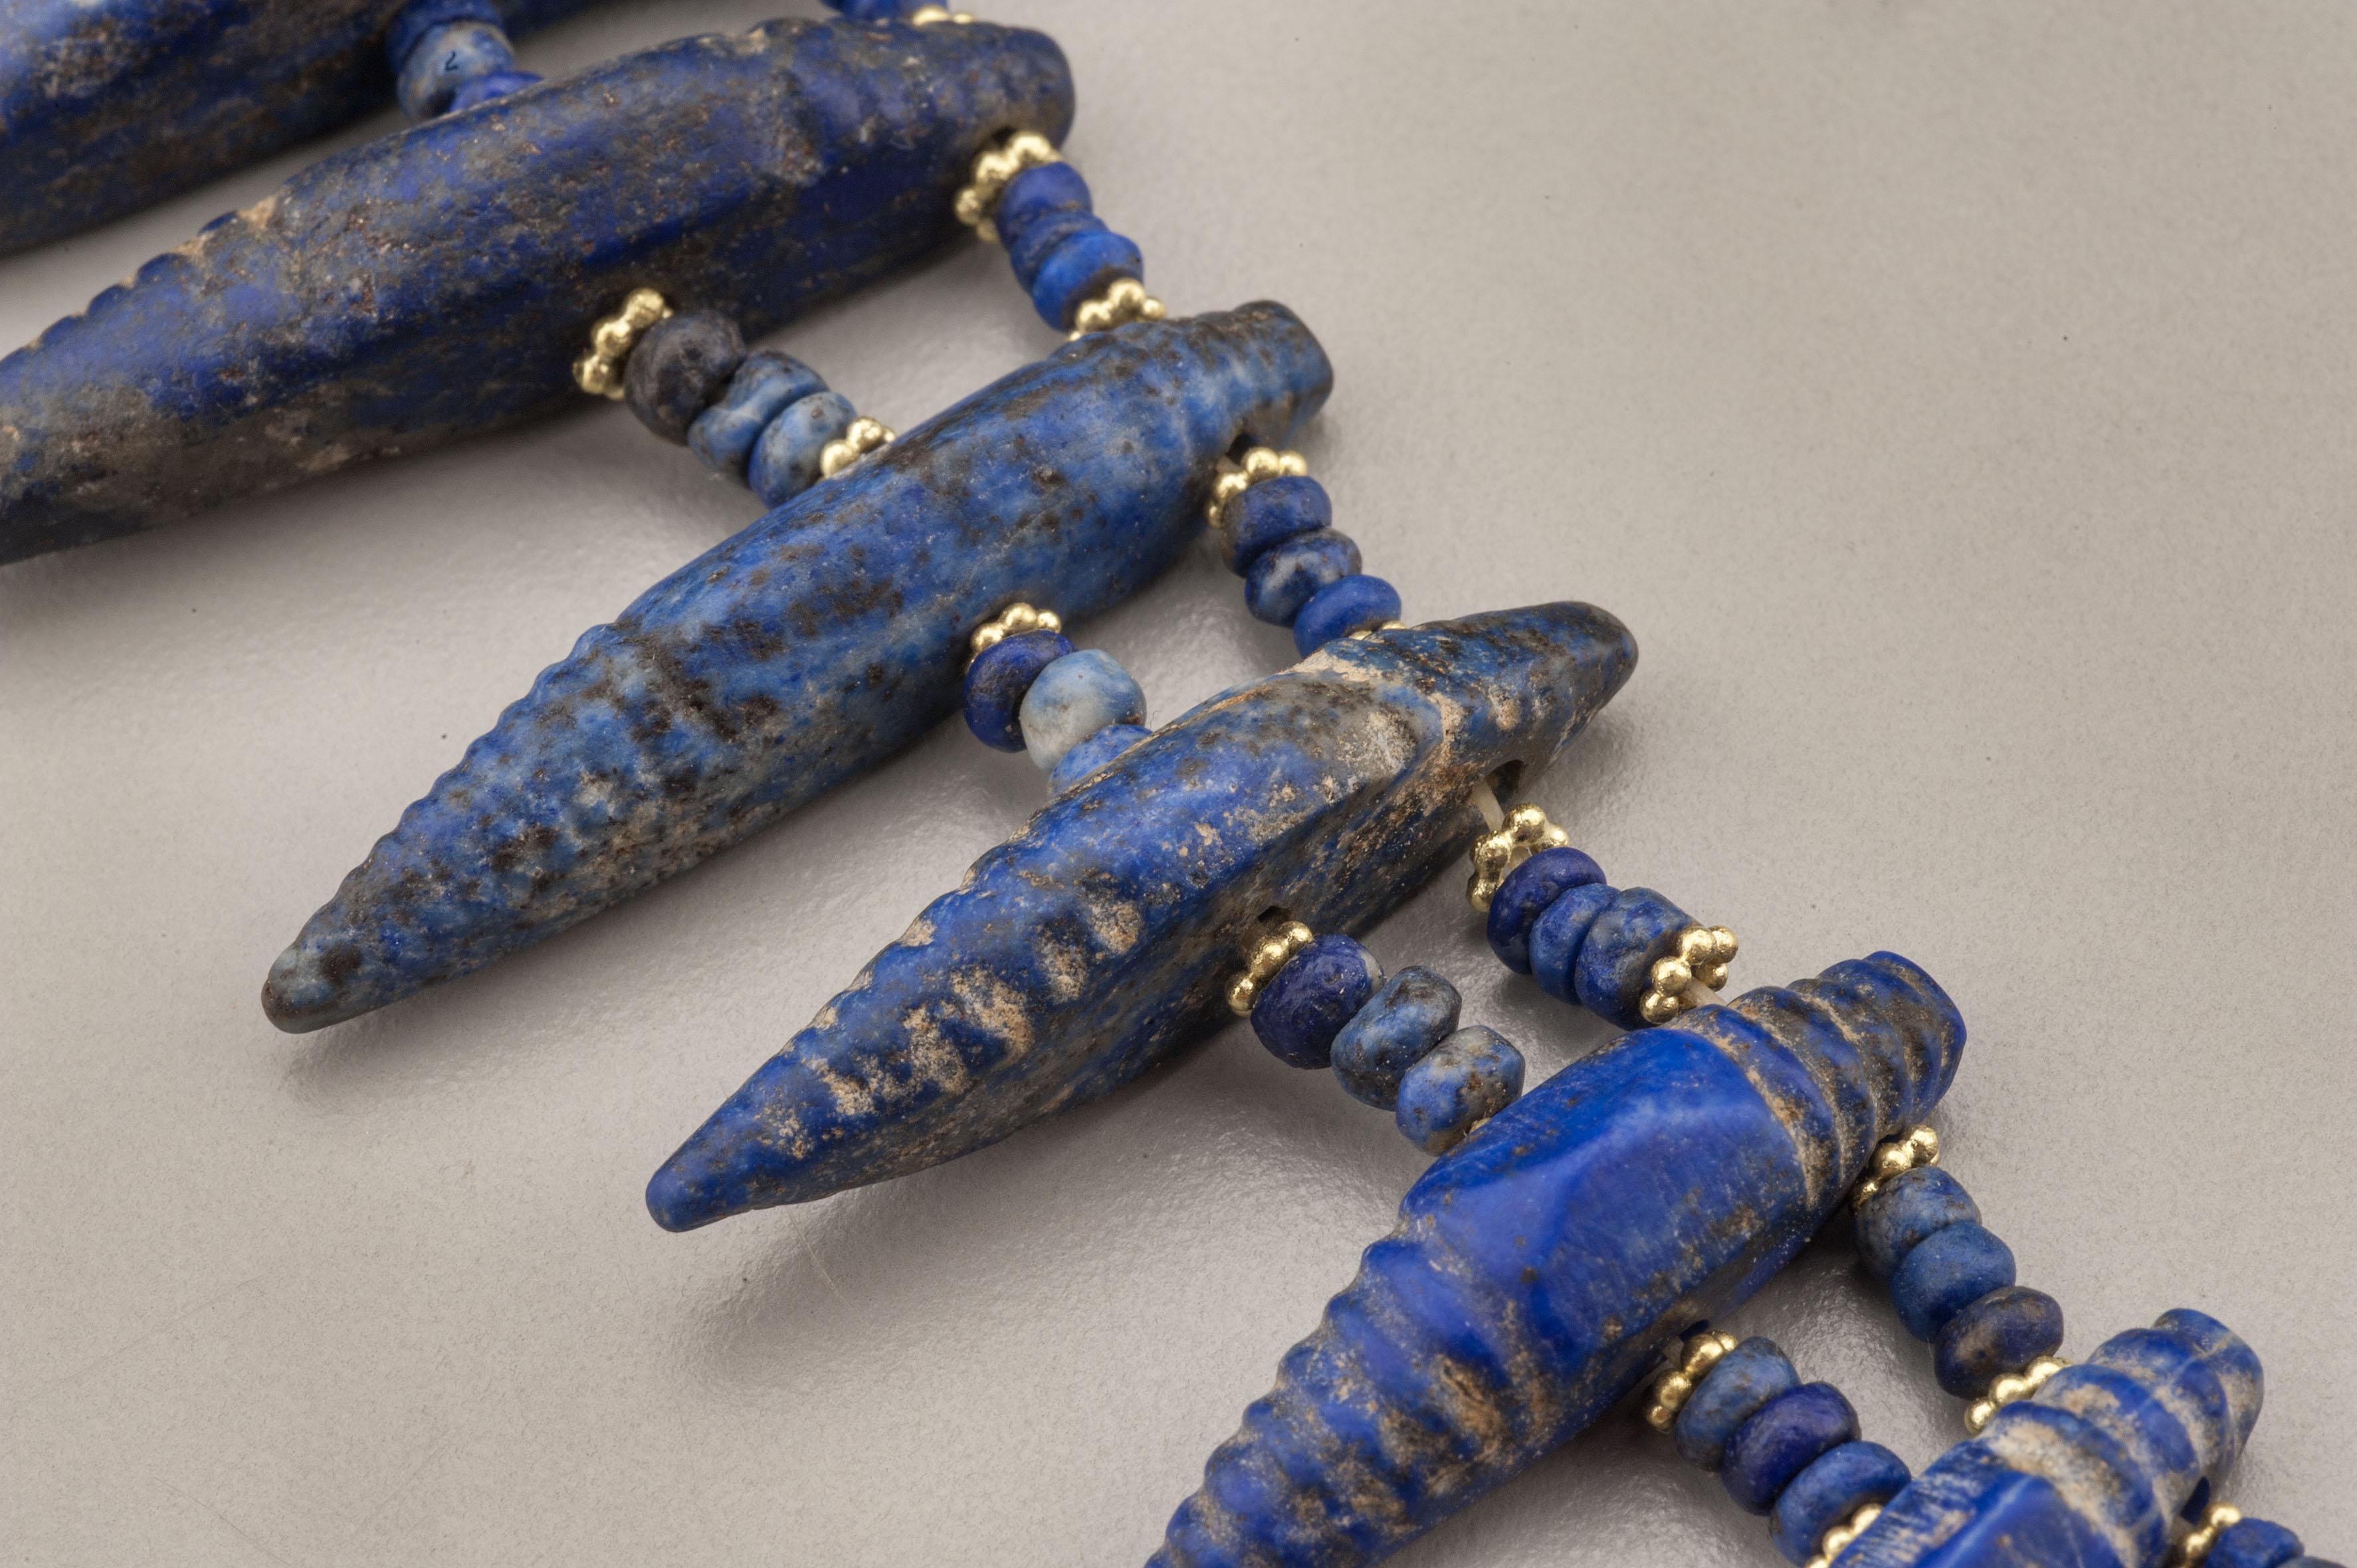 One hundred and seventy-one lapis lazuli beads, twenty-three of which are double drilled pendant beads of an elongated form. Each of these are faced with 22k gold granulated ring beads. There are ninety-two of these gold beads in the necklace. The